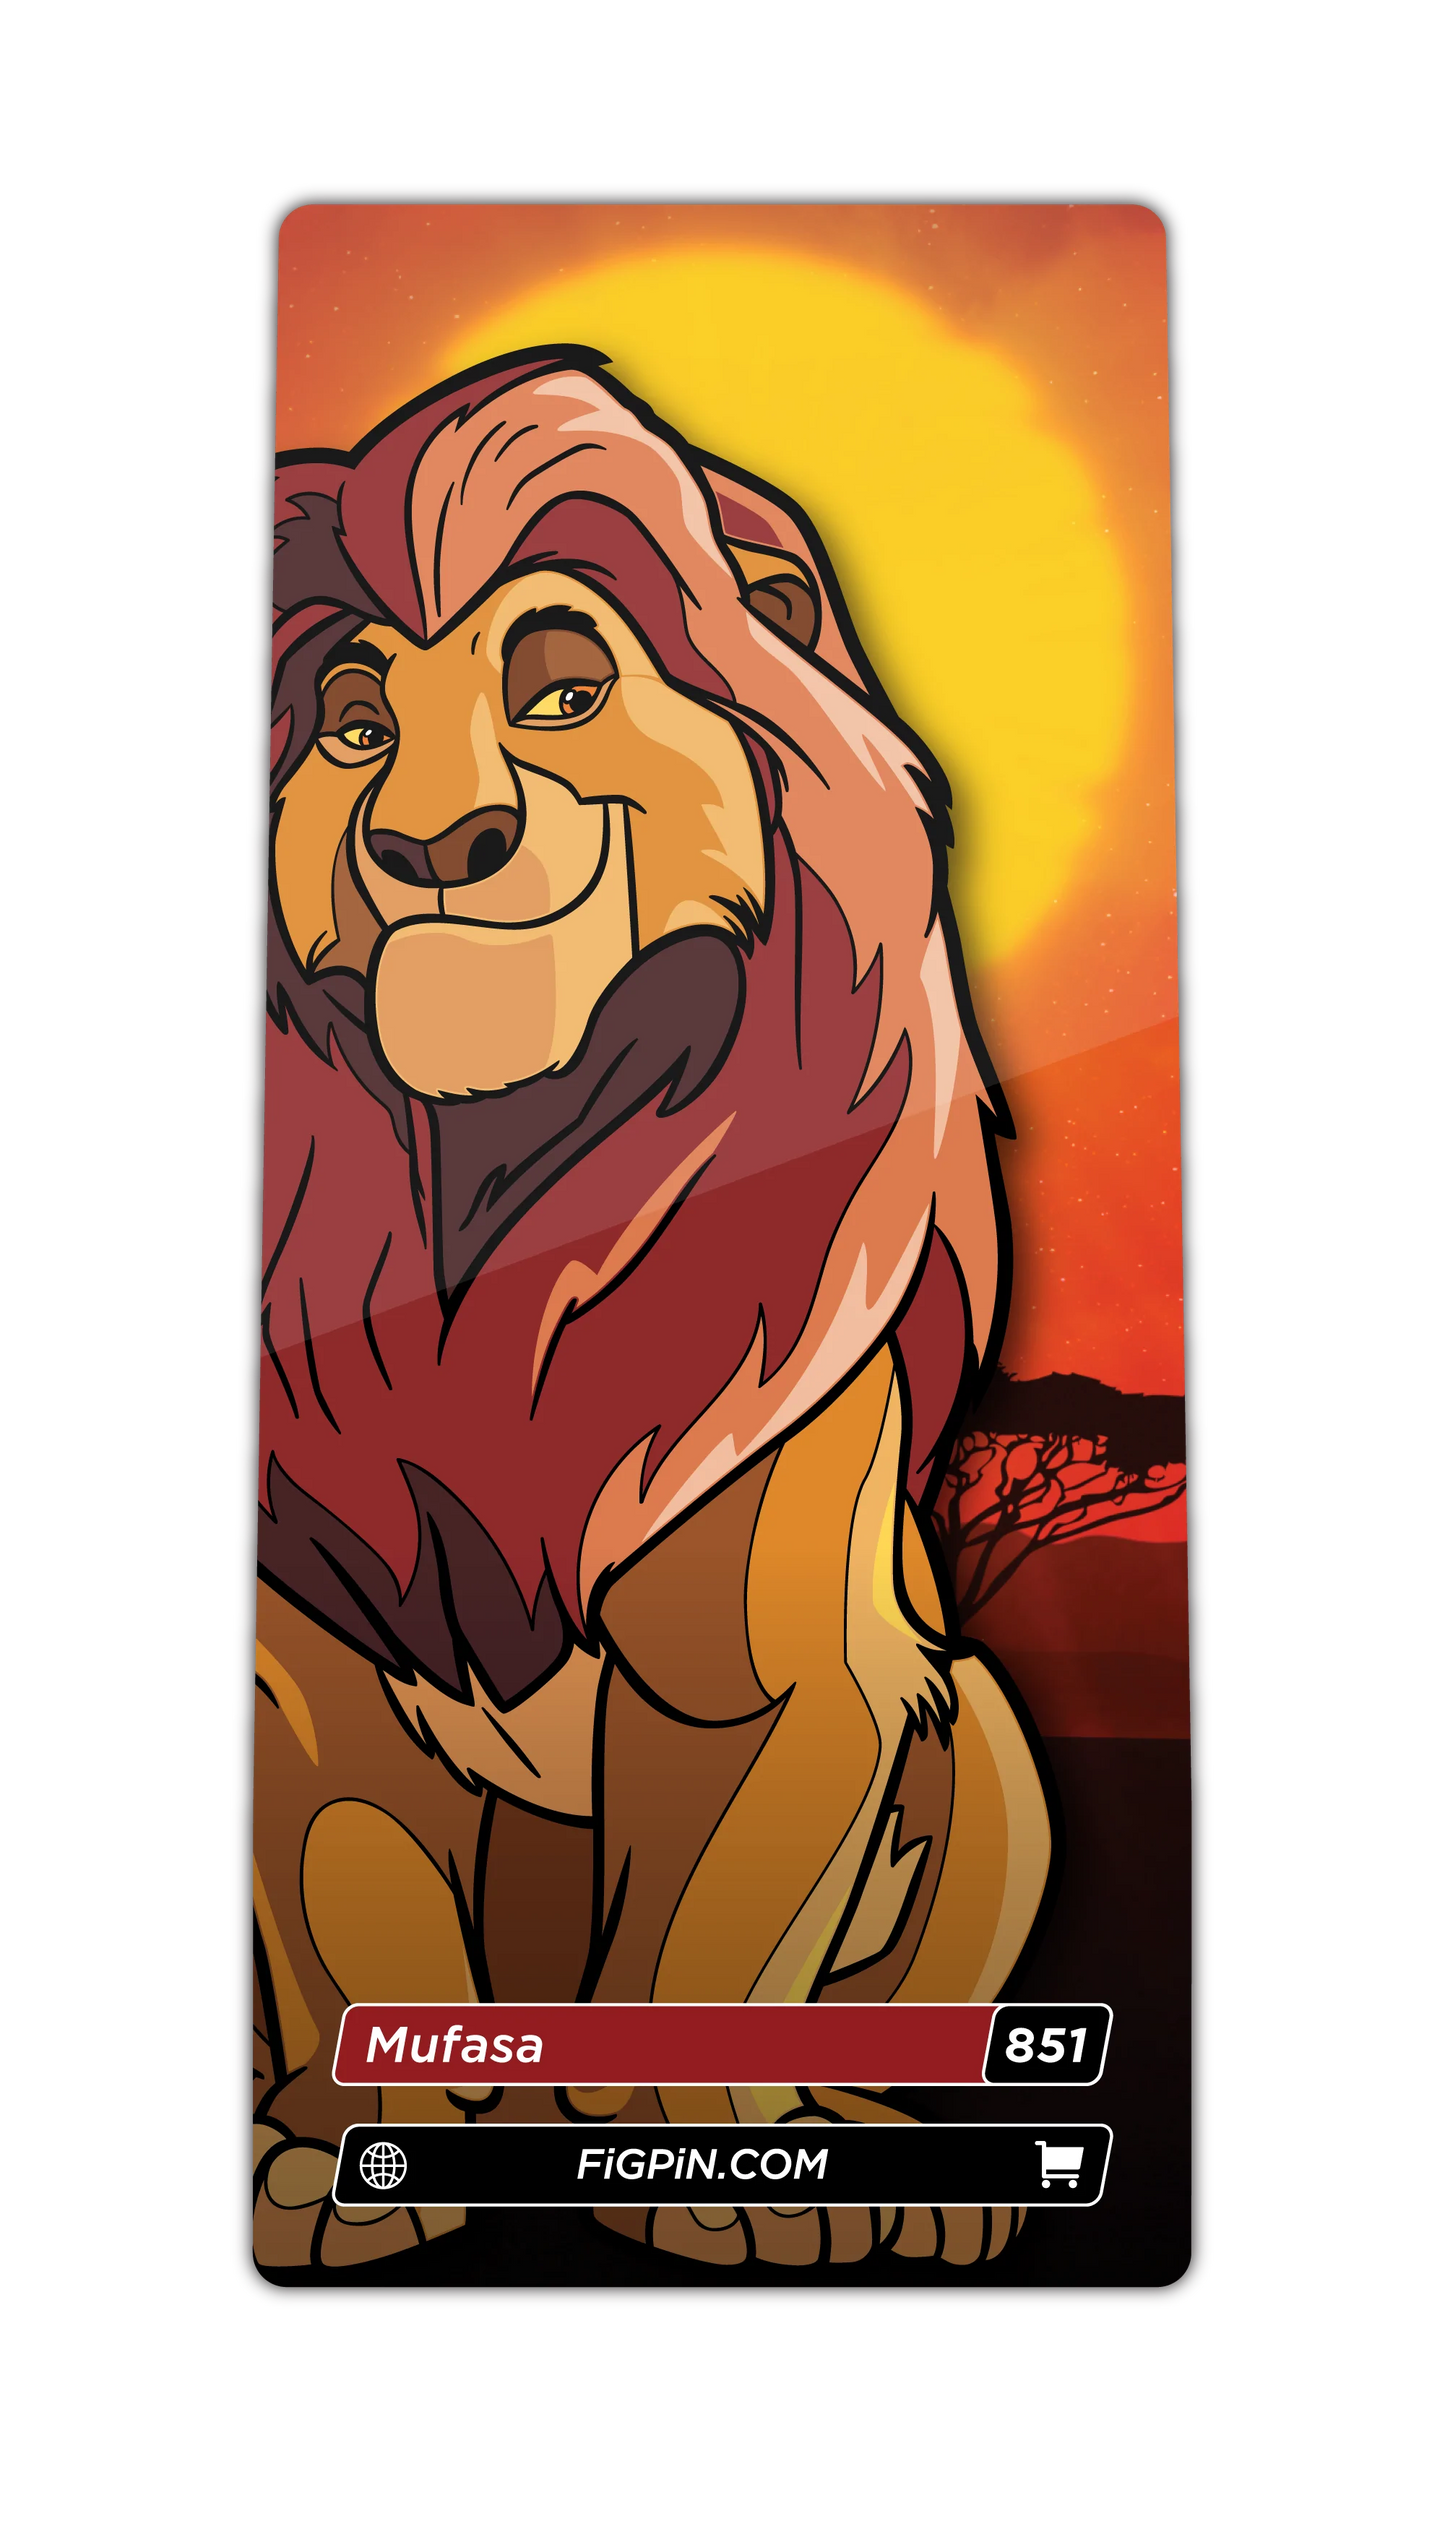 FiGPiN Mufasa (851) Property: The Lion King